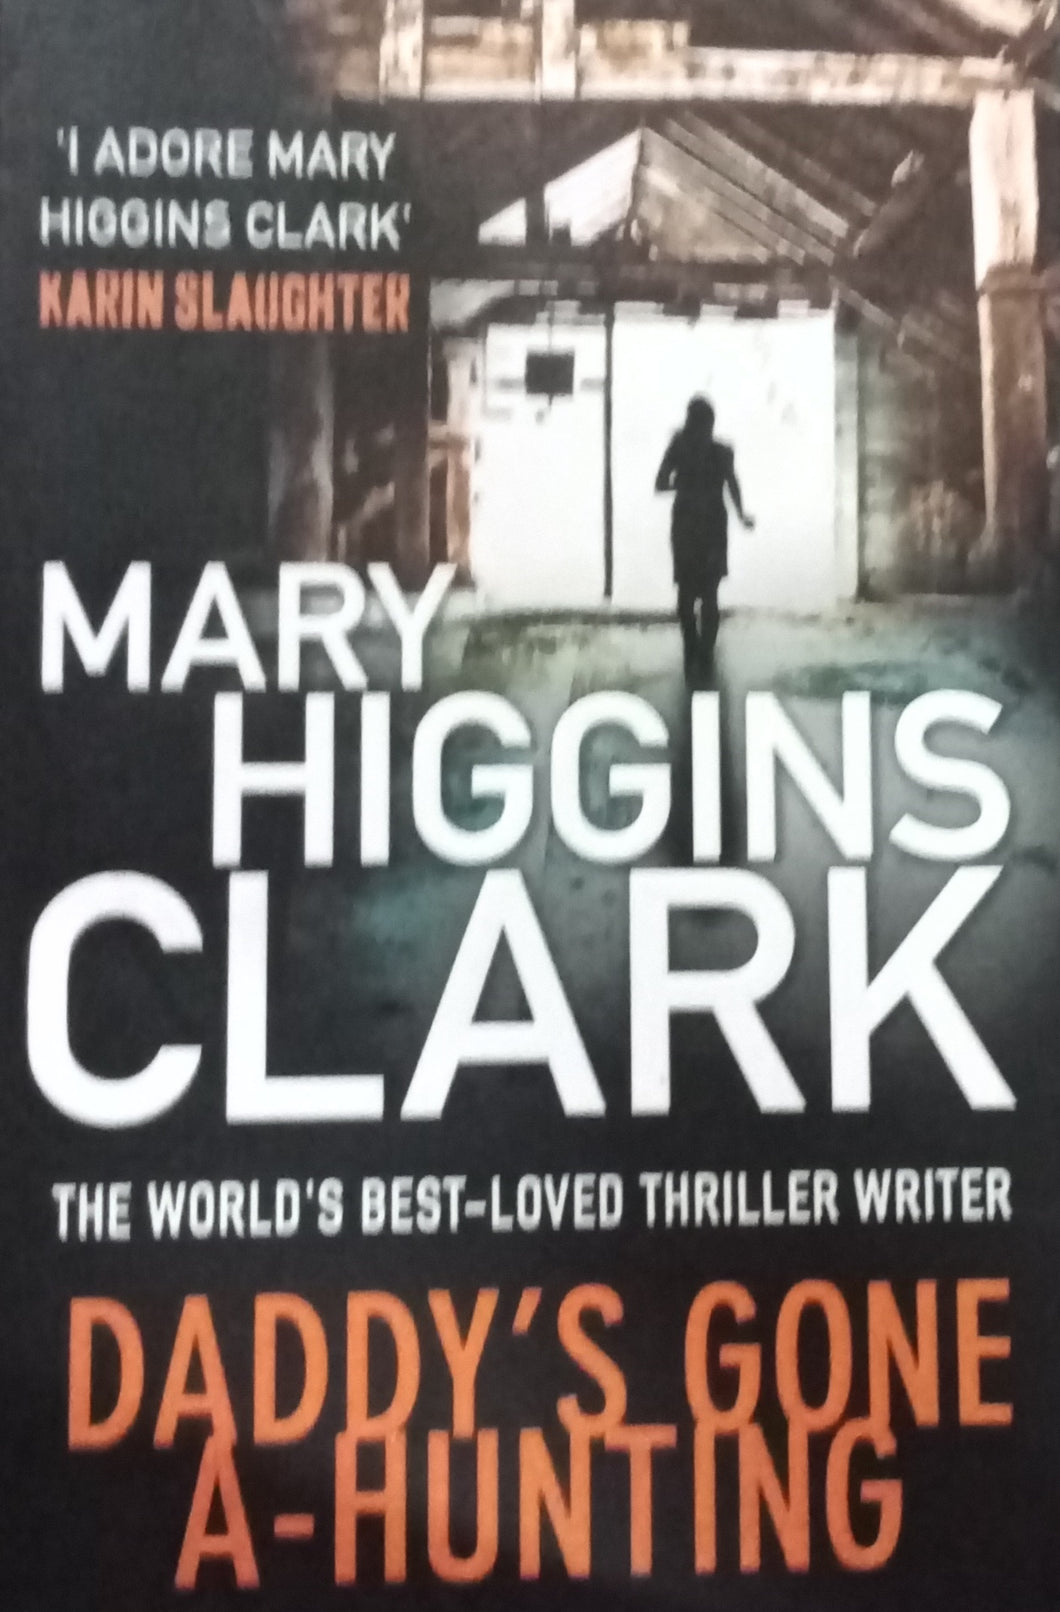 Daddy's Gone A - Hunting by Mary Higgins Clark